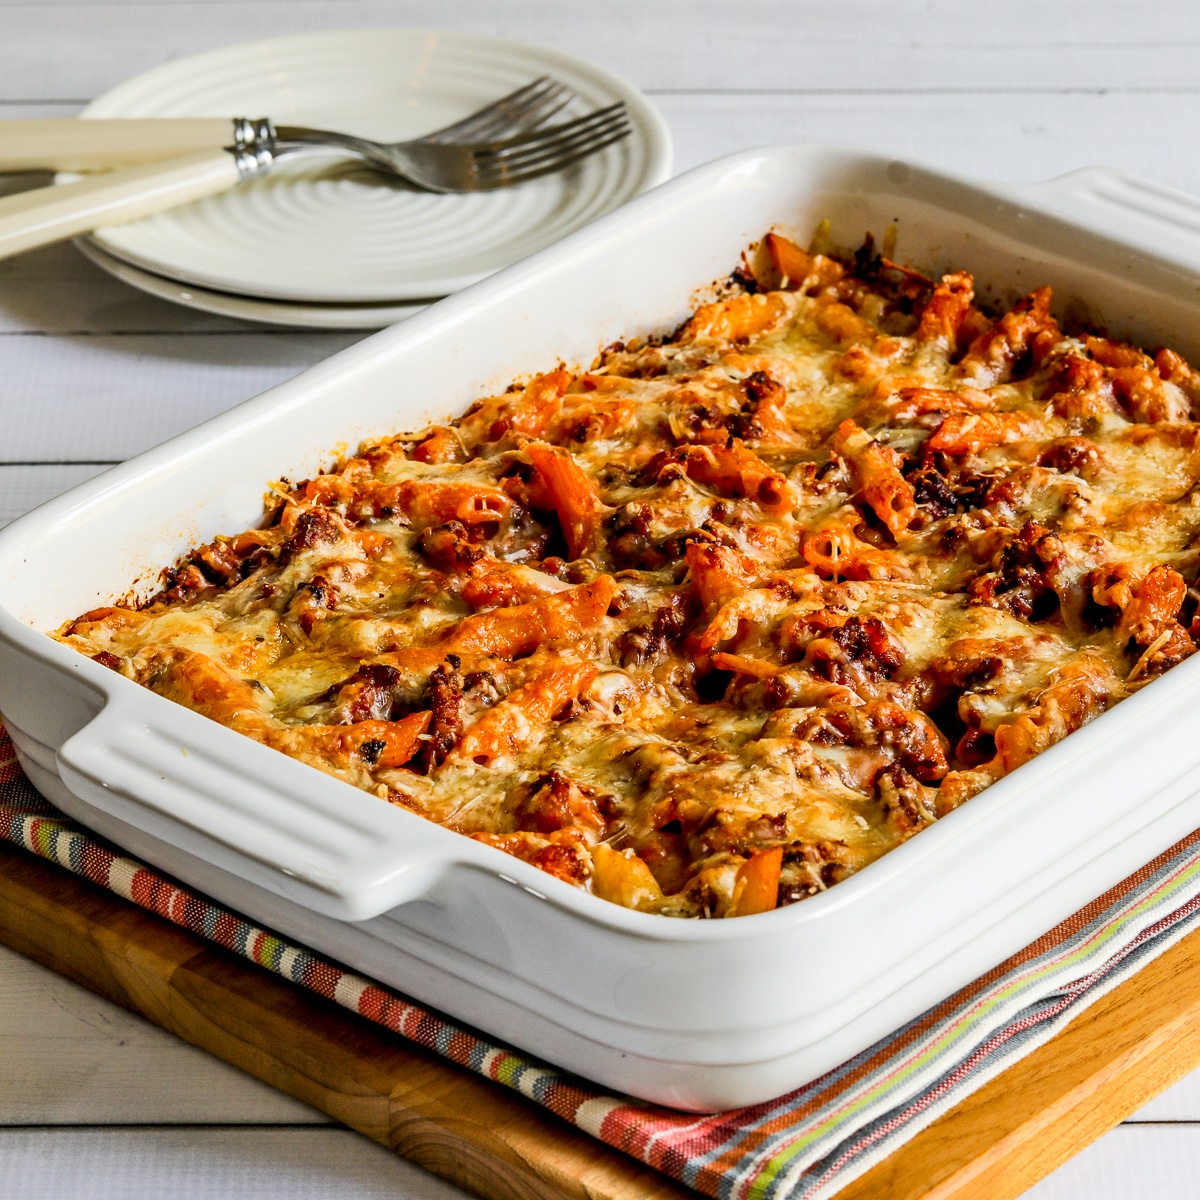 Baked penne with sausages in a square image of a casserole in a baking dish